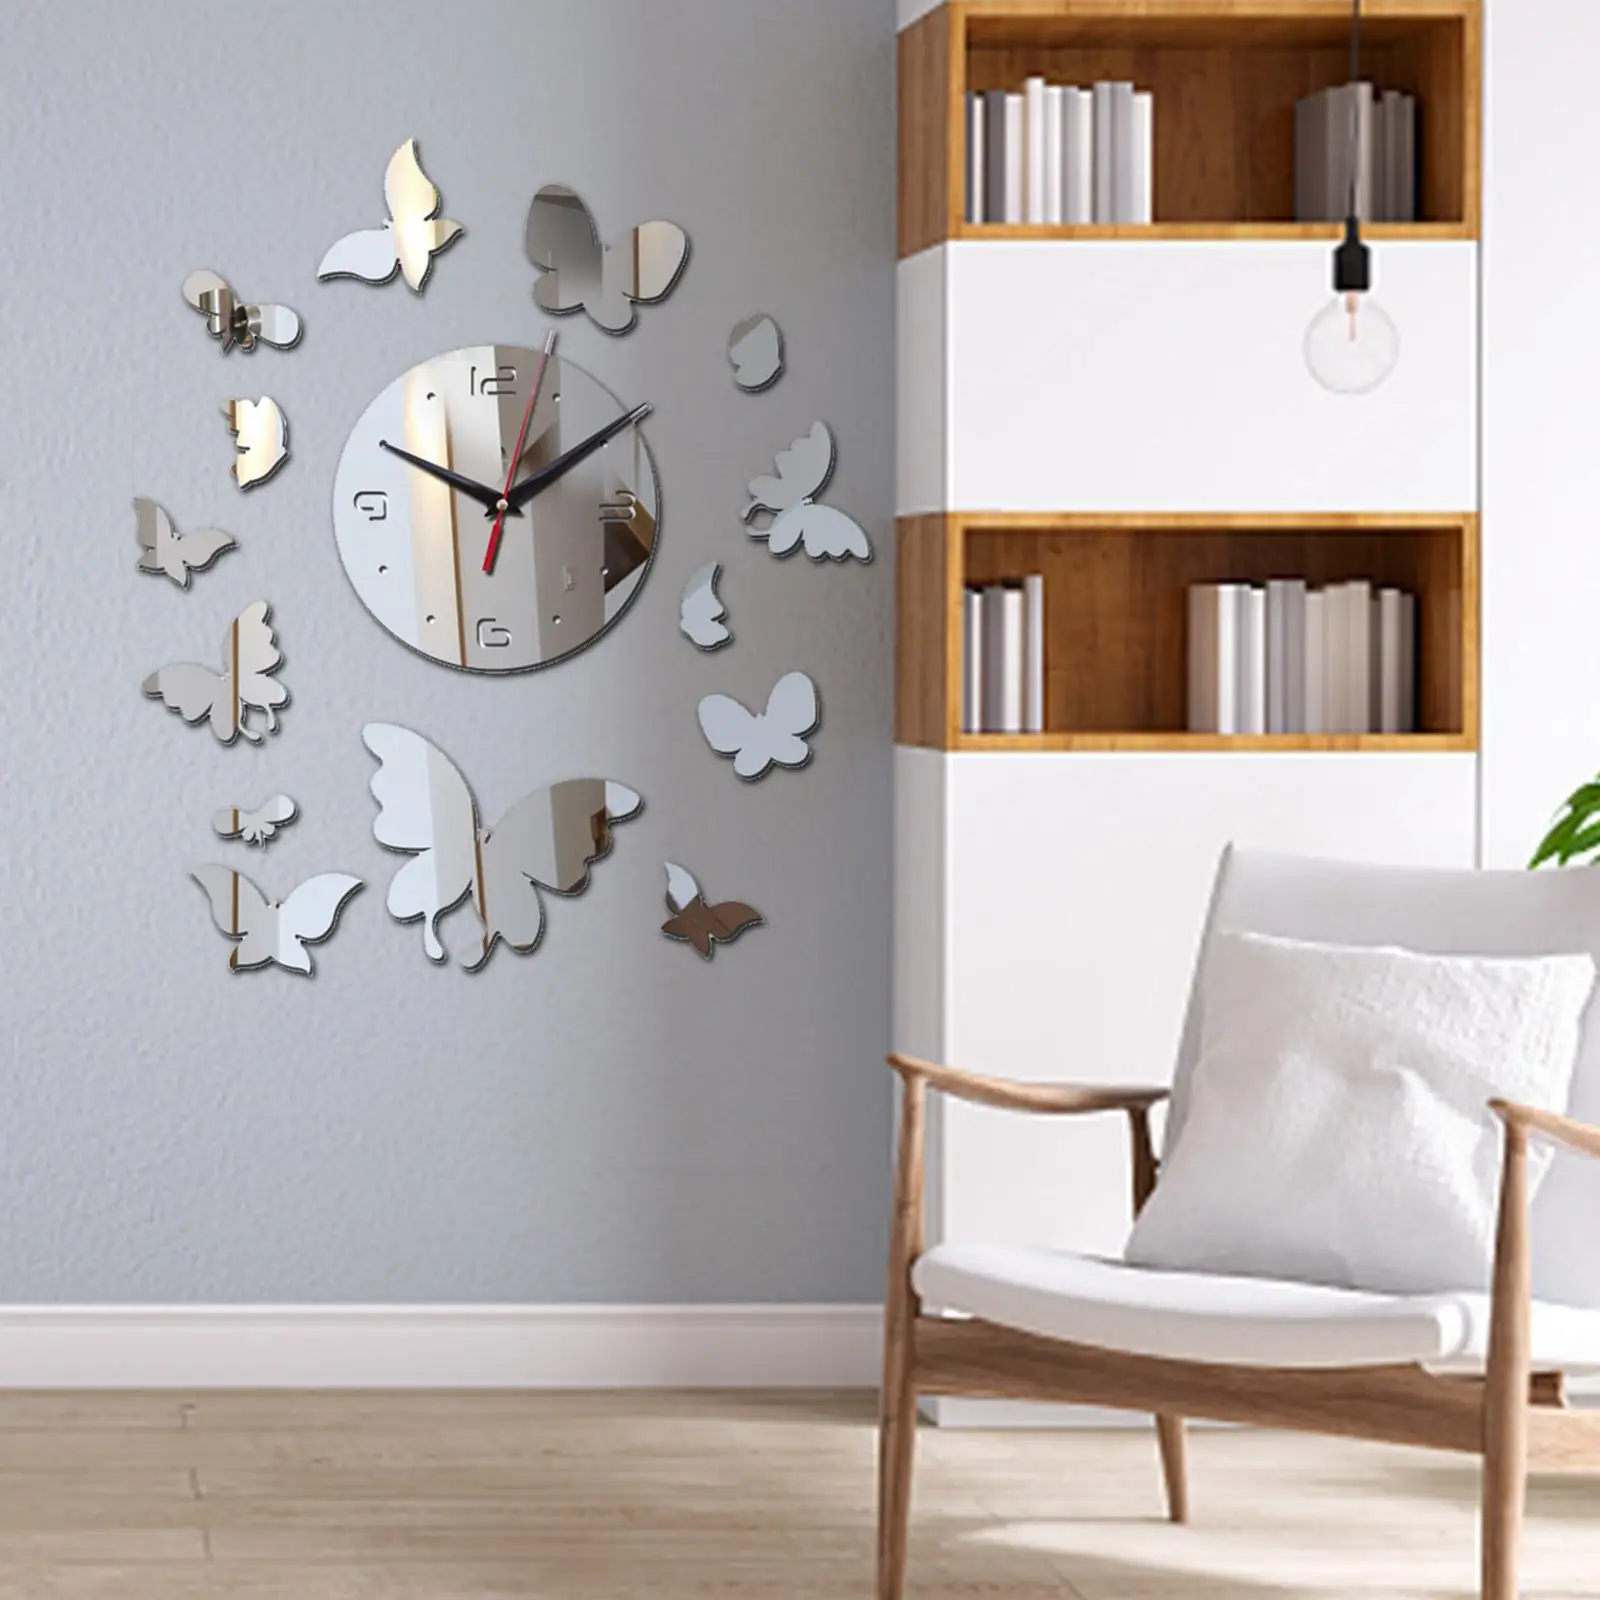 Wall Clock Sticker Removable Butterfly Acrylic for Office Decor